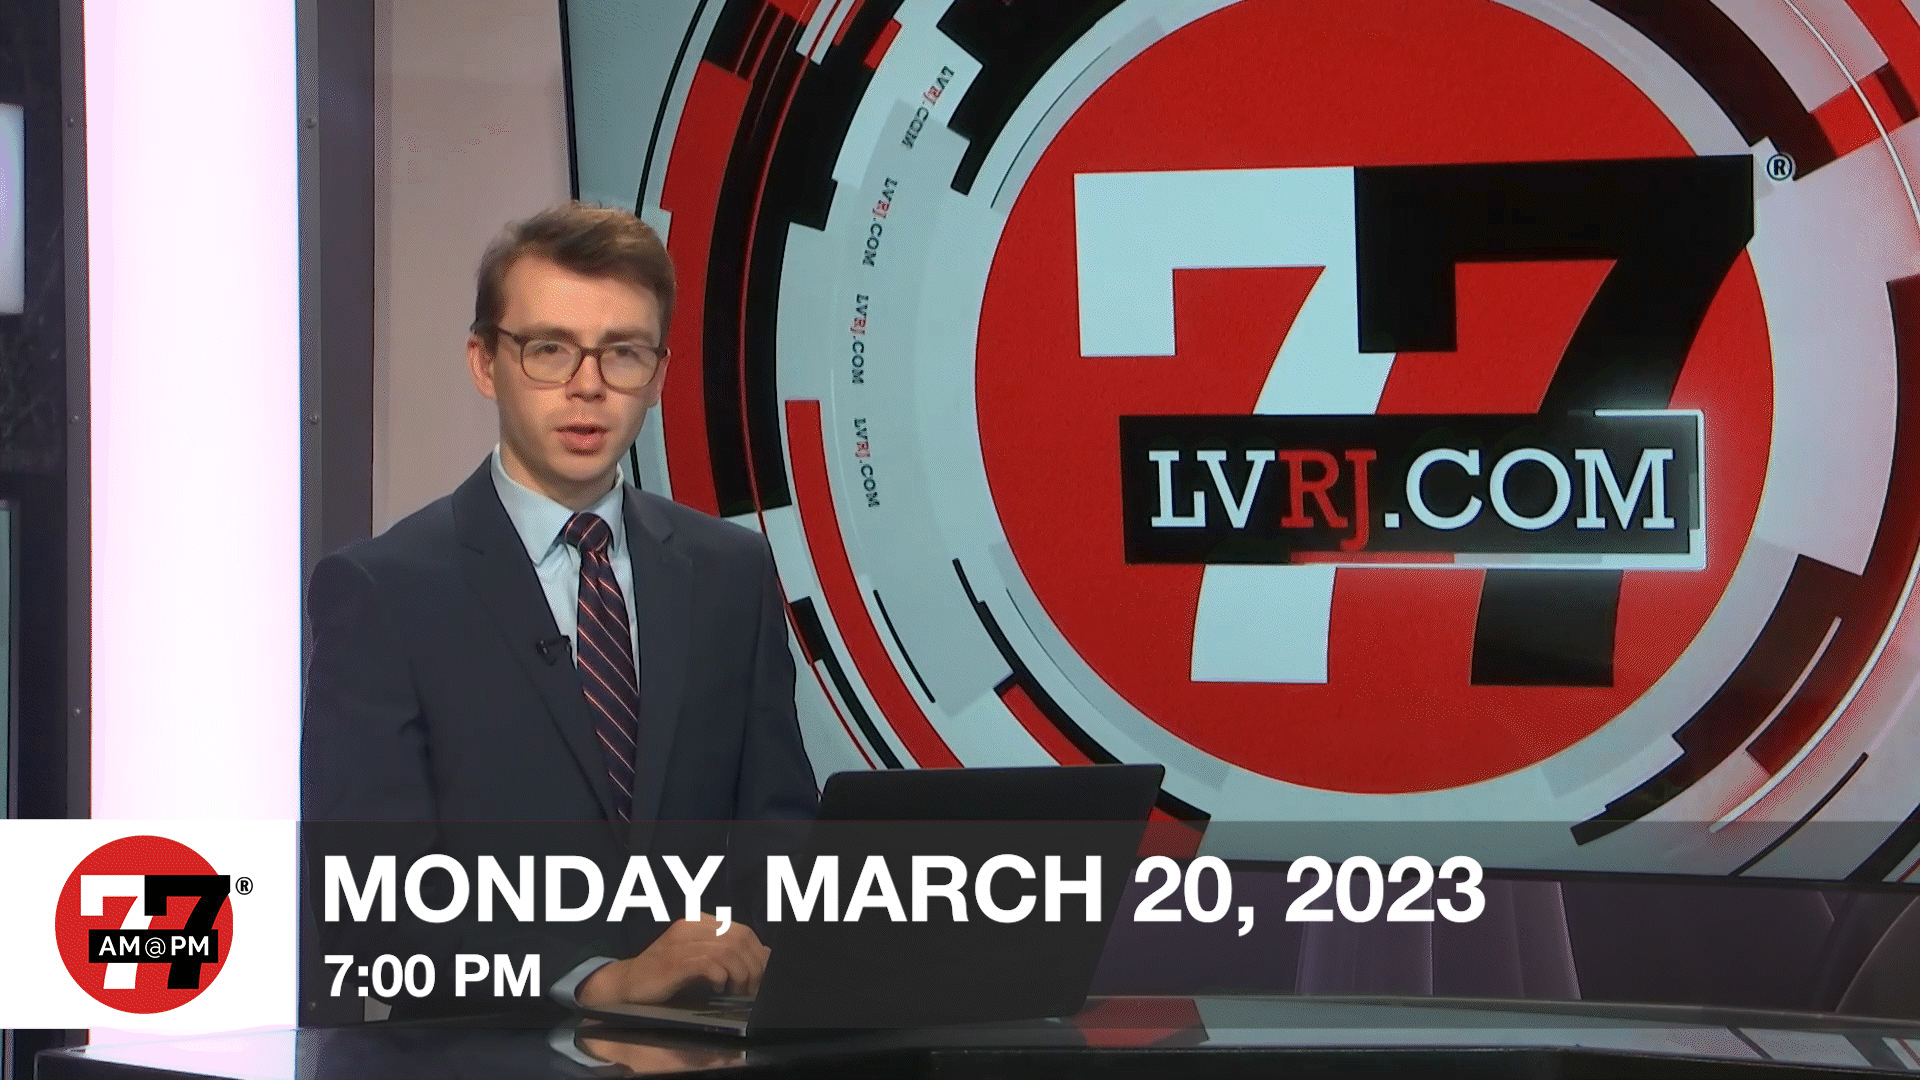 7@7PM for Monday, March 20, 2023